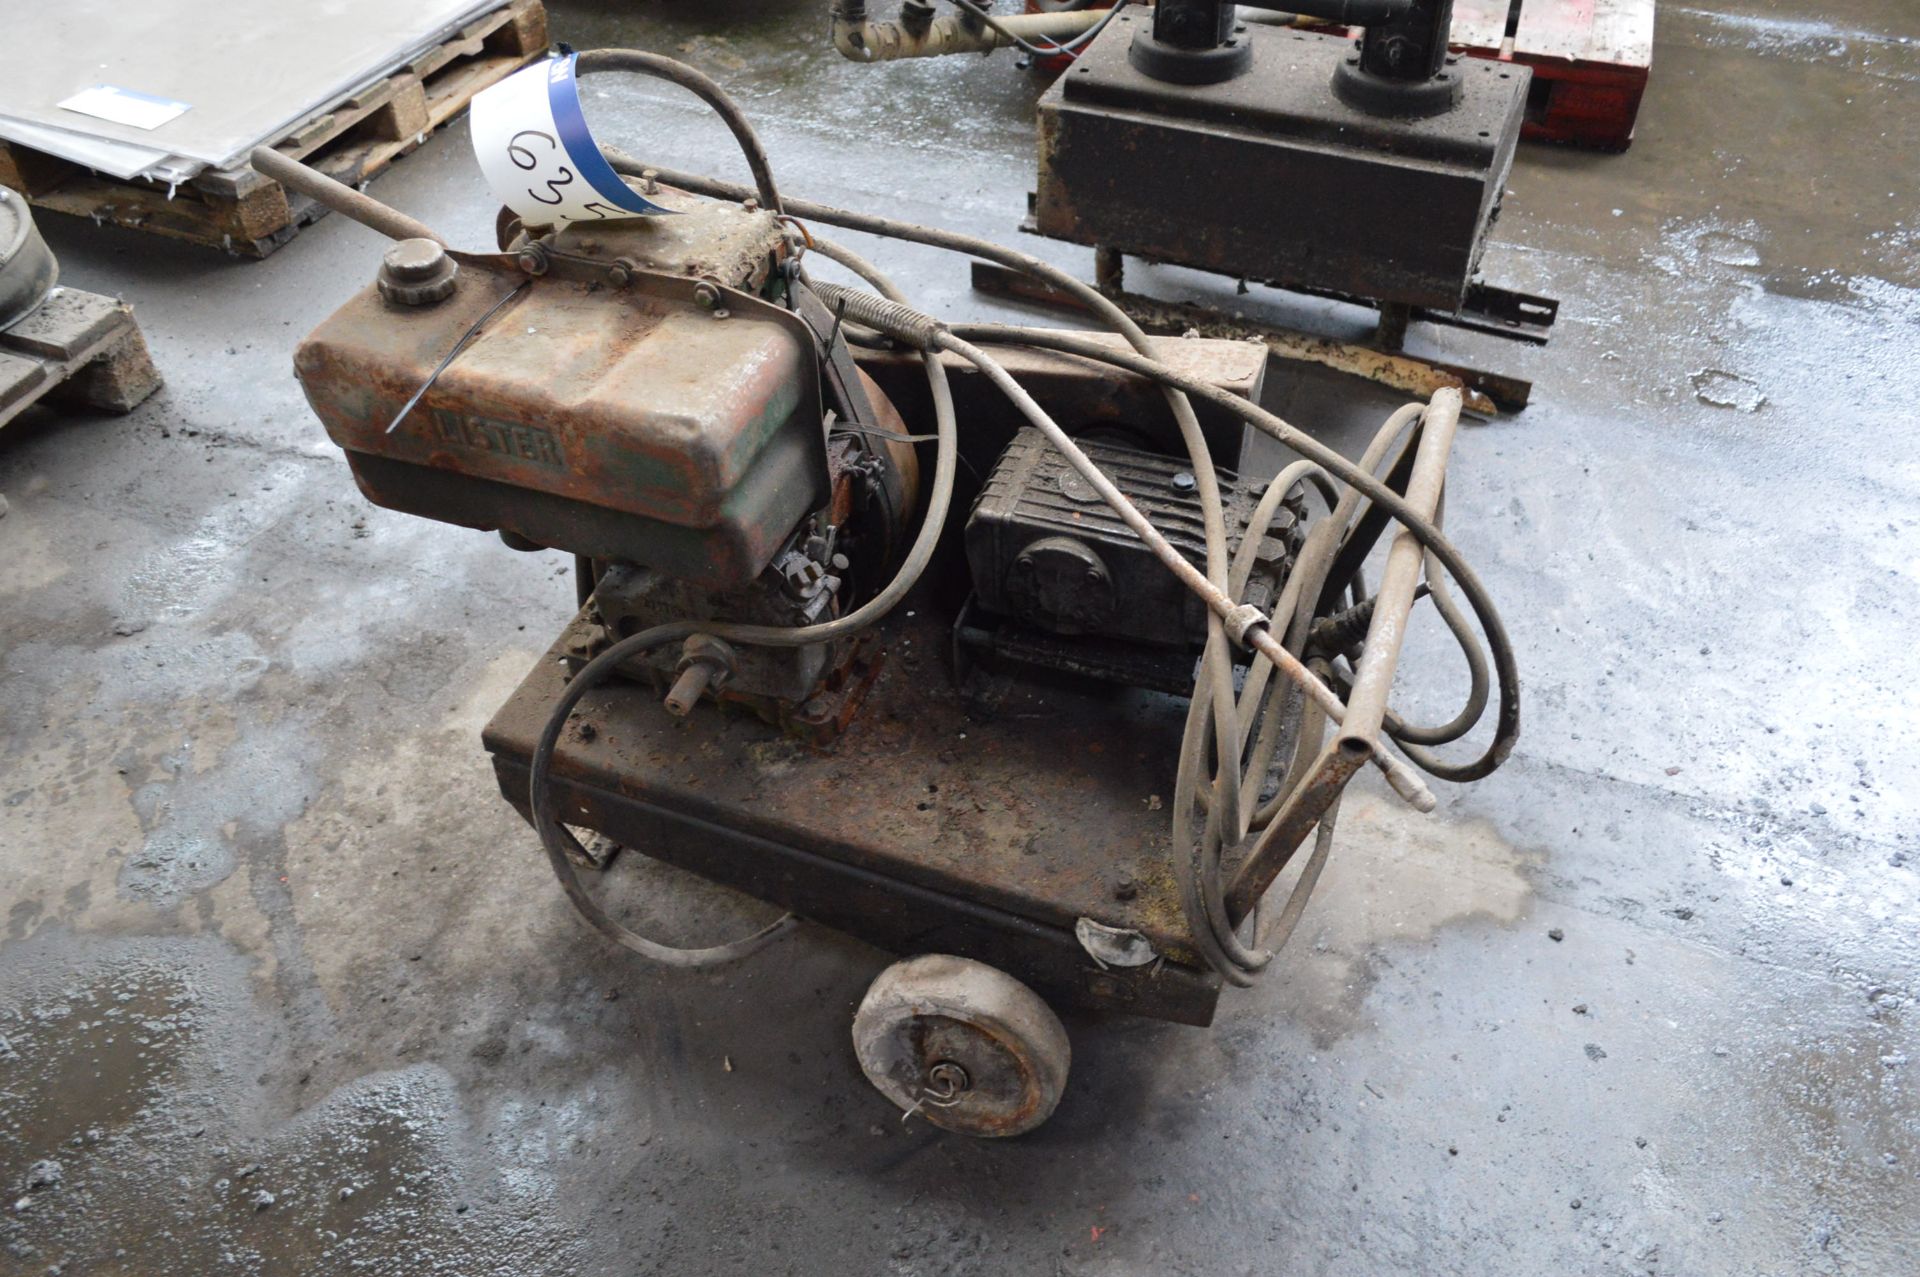 Portable Pressure Washer, with Lister engine